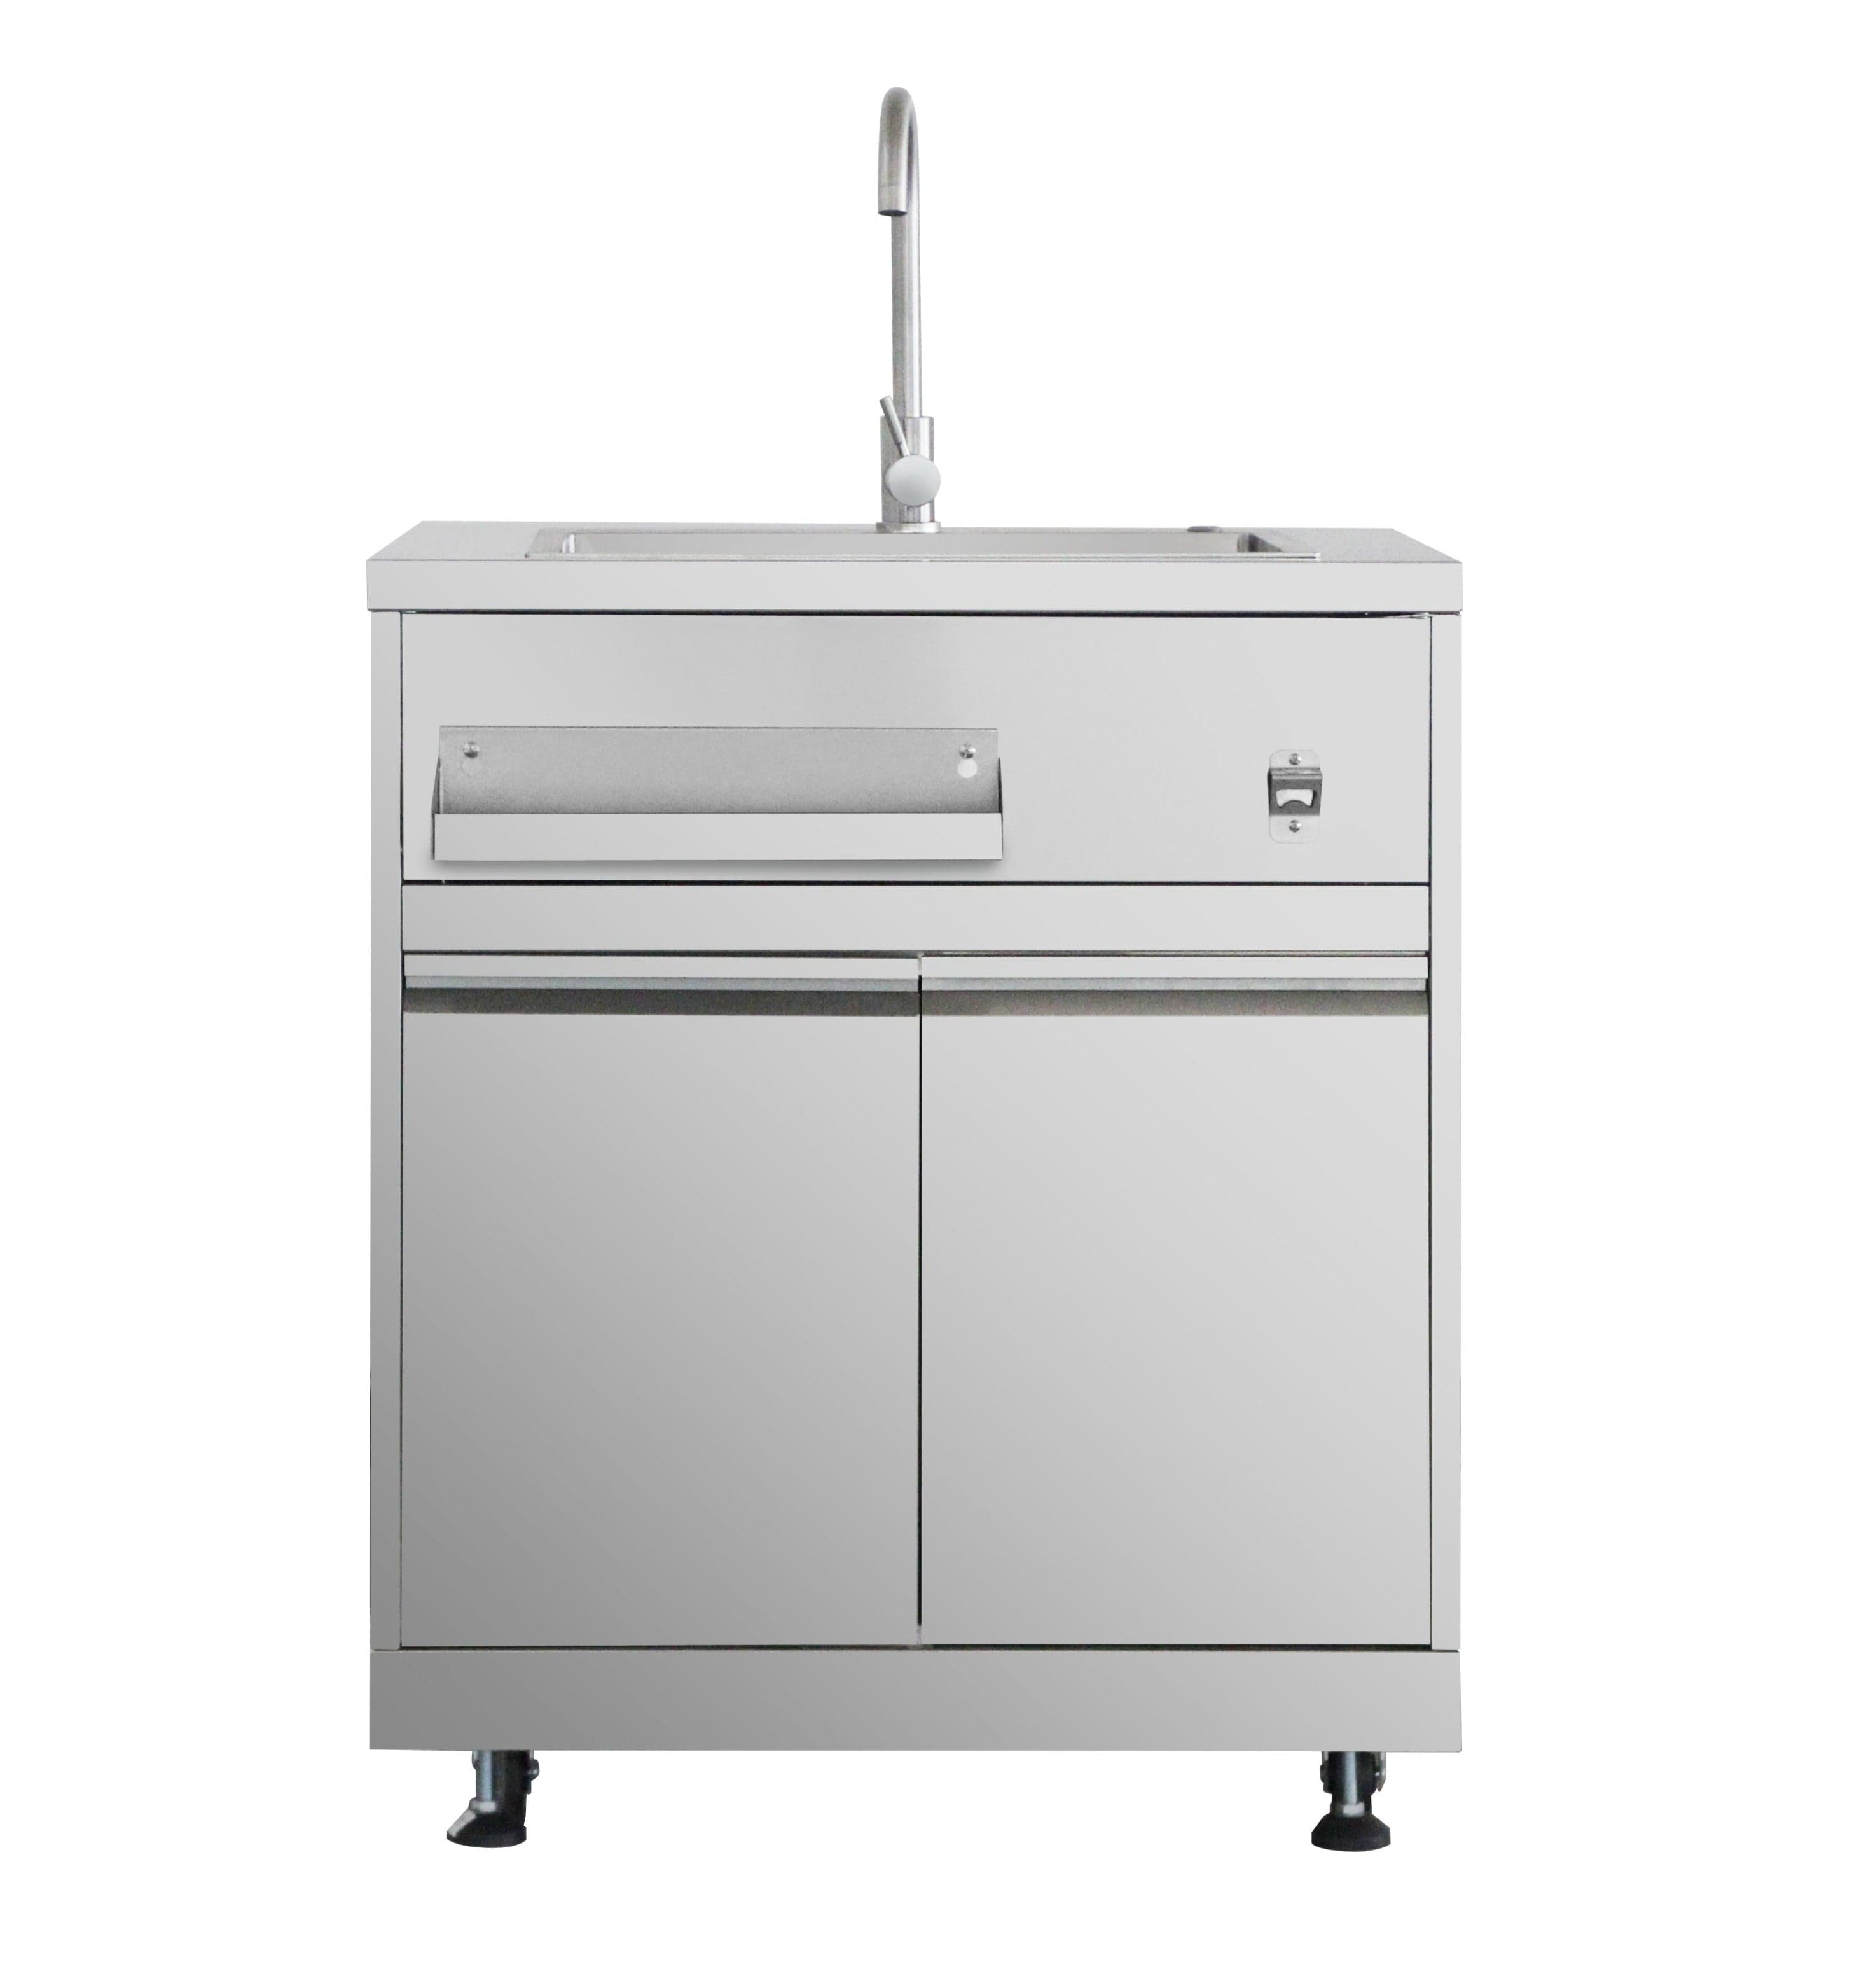 Thor Outdoor Kitchen Package with Propane Gas Grill and Refrigerator, AP-Outdoor-LP-R-7 Outdoor Grill Package AP-Outdoor-LP-R-7 Luxury Appliances Direct